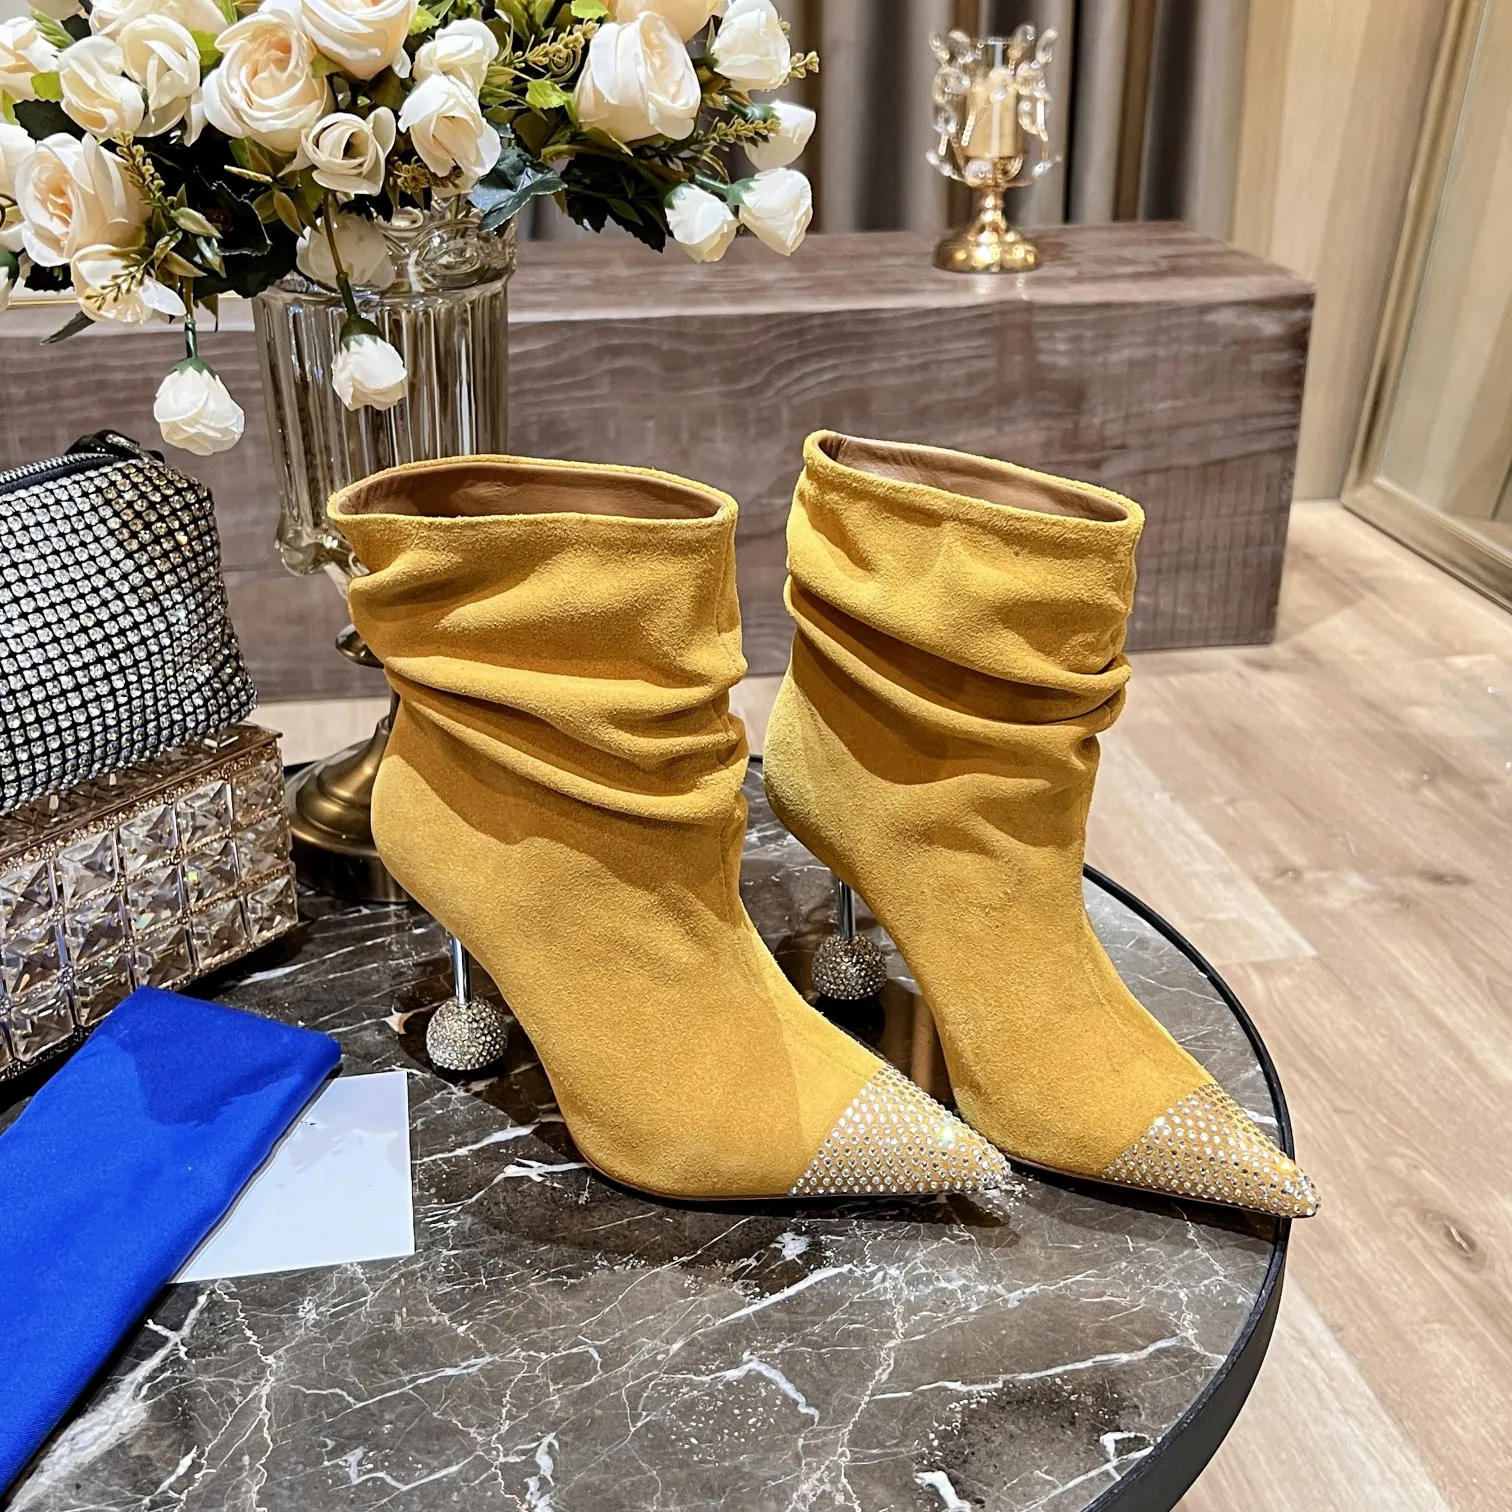 Buty A03 Designer Top Version ręcznie robione 2022 NOWOŚĆ AQ Home Winted Boots